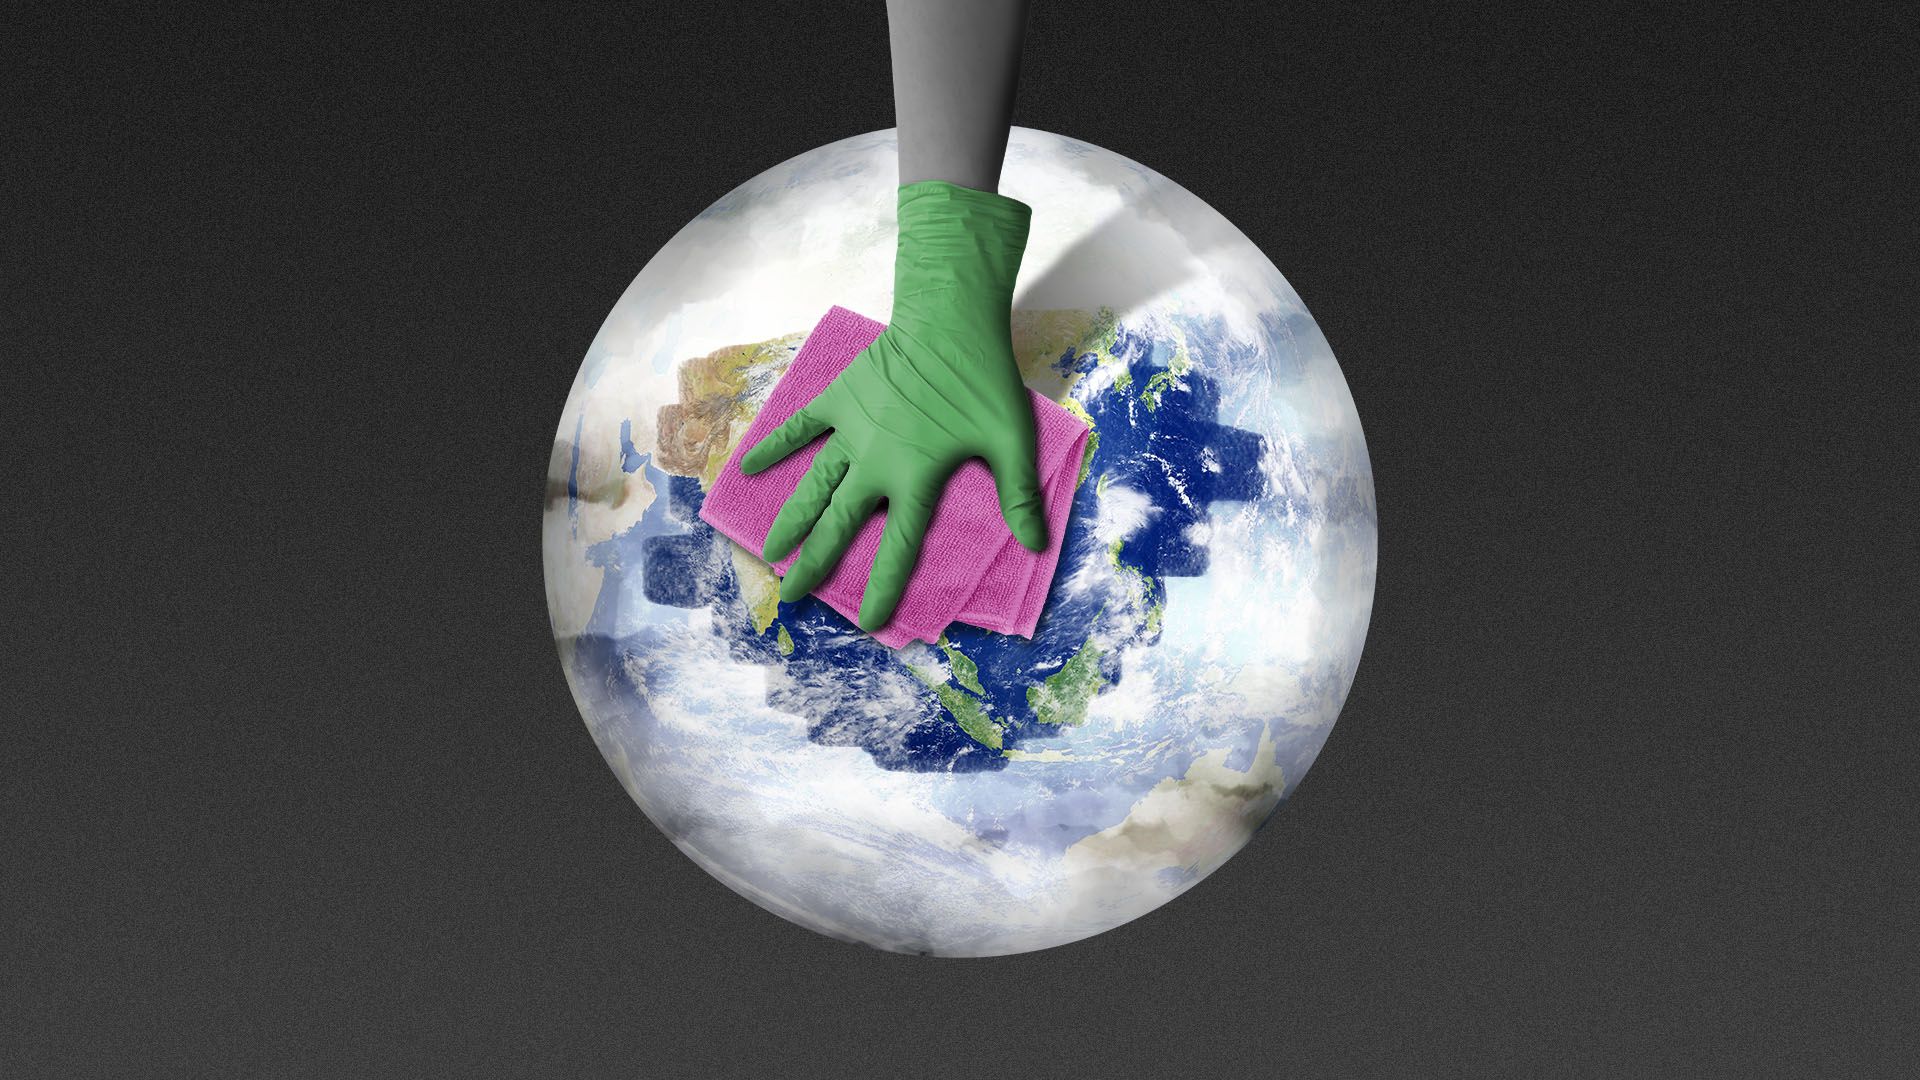 Illustration of a hand with a medical glove wiping a clear spot on a smoggy Earth.